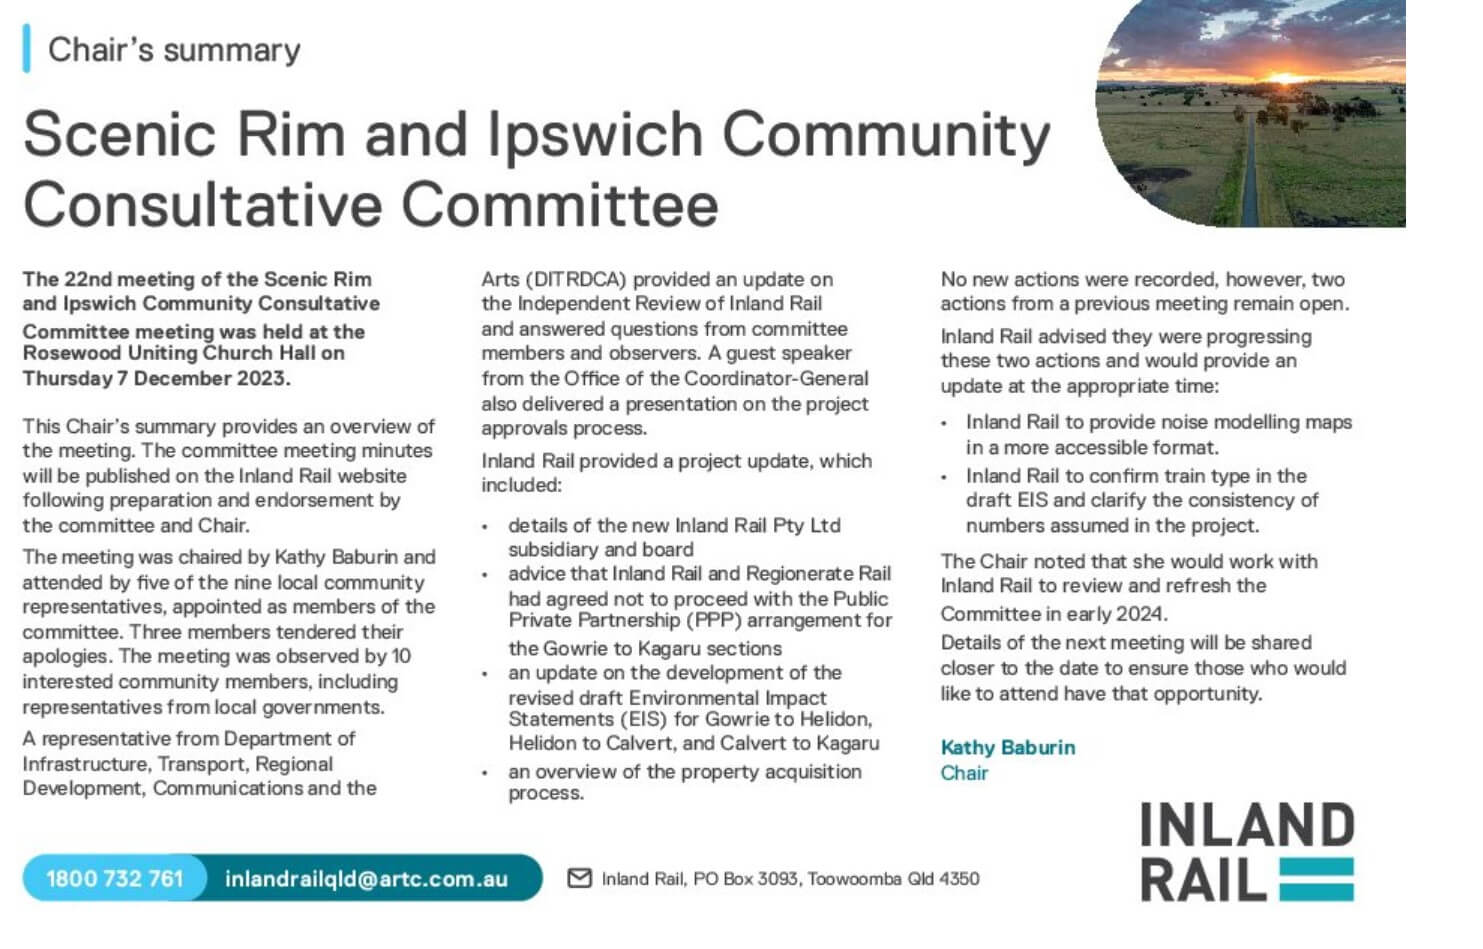 Scenic Rim and Ipswich Community Consultative Committee Chair's Summary for the meeting on 7 December 2023